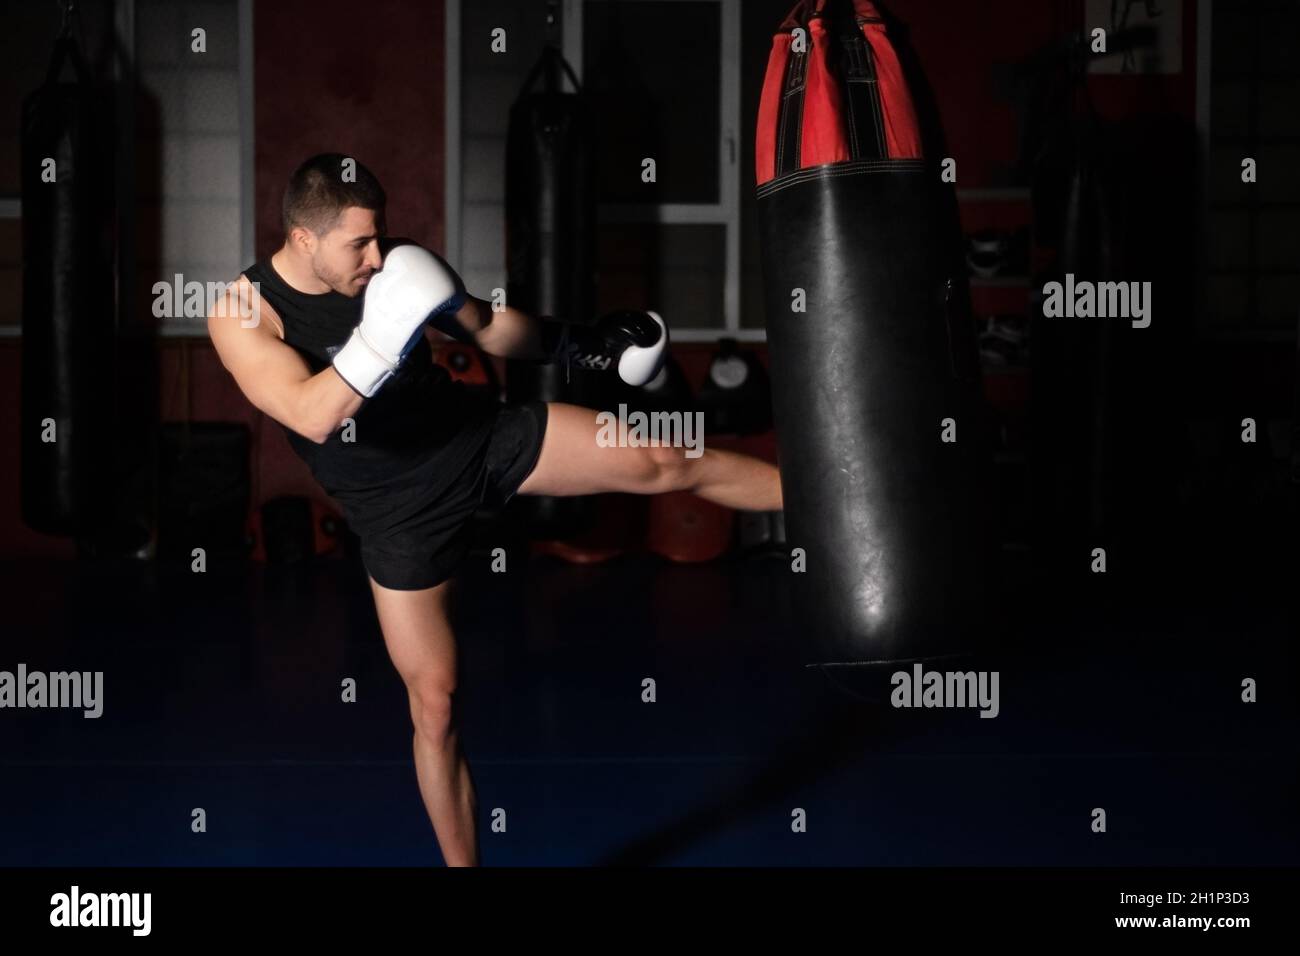 Muscular handsome kickboxing fighter giving a forceful kick during a practise round with a boxing bag. High quality photo Stock Photo